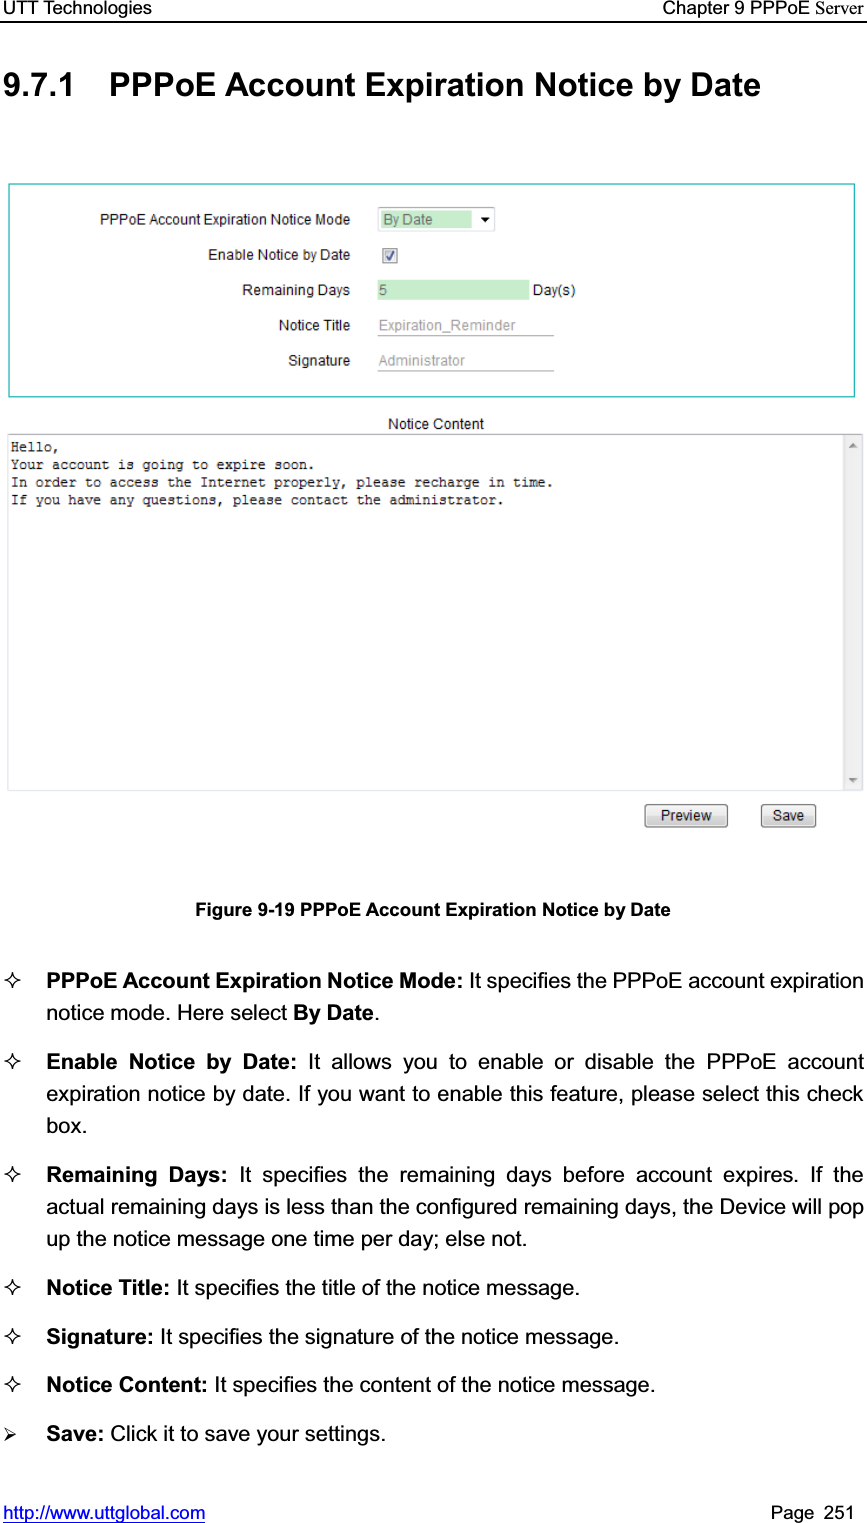 UTT Technologies    Chapter 9 PPPoE Serverhttp://www.uttglobal.com Page 251 9.7.1  PPPoE Account Expiration Notice by Date Figure 9-19 PPPoE Account Expiration Notice by Date PPPoE Account Expiration Notice Mode: It specifies the PPPoE account expiration notice mode. Here select By Date.Enable Notice by Date: It allows you to enable or disable the PPPoE account expiration notice by date. If you want to enable this feature, please select this check box. Remaining Days: It specifies the remaining days before account expires. If the actual remaining days is less than the configured remaining days, the Device will popup the notice message one time per day; else not. Notice Title: It specifies the title of the notice message. Signature: It specifies the signature of the notice message. Notice Content: It specifies the content of the notice message. ¾Save: Click it to save your settings.